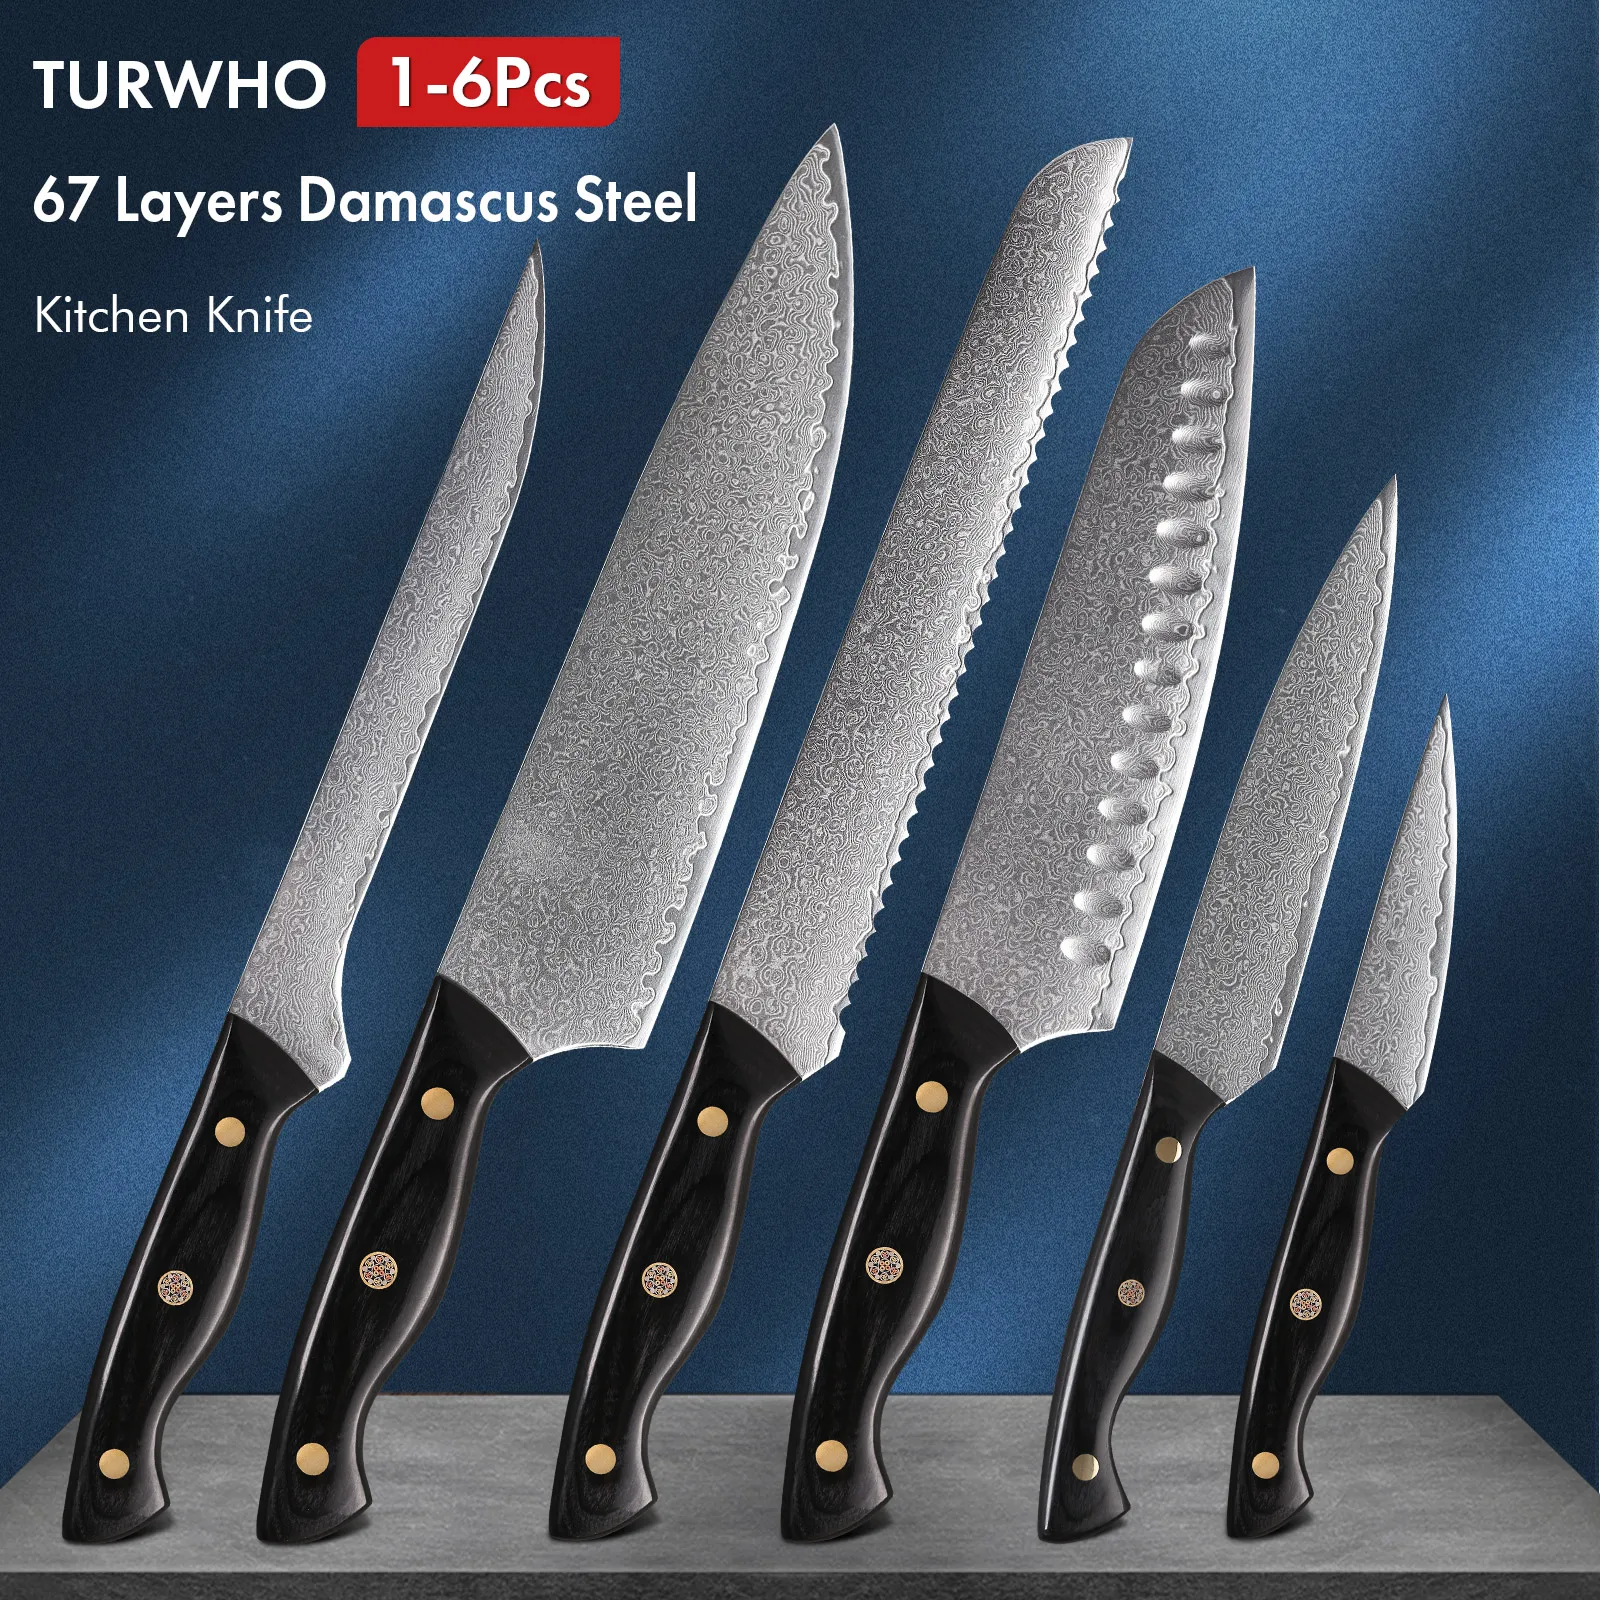 XITUO stainless steel kitchen knives set Japanese chef knife Damascus steel  Pattern Utility Paring Santoku Slicing knife Health - AliExpress